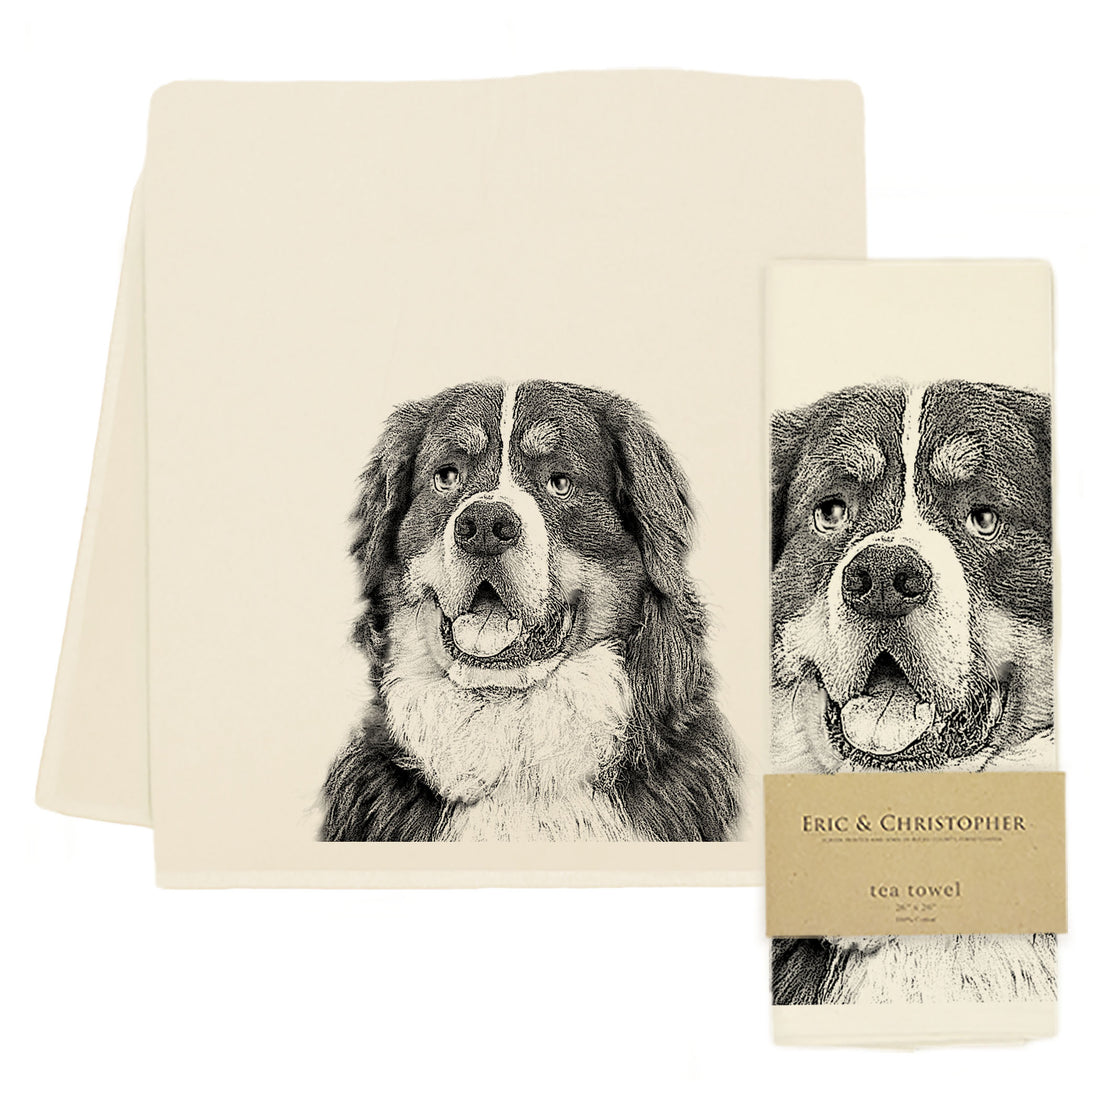 A screen-printed Bernese Mountain Dog Tea Towel by Eric &amp; Christopher next to its packaging, made in the USA.